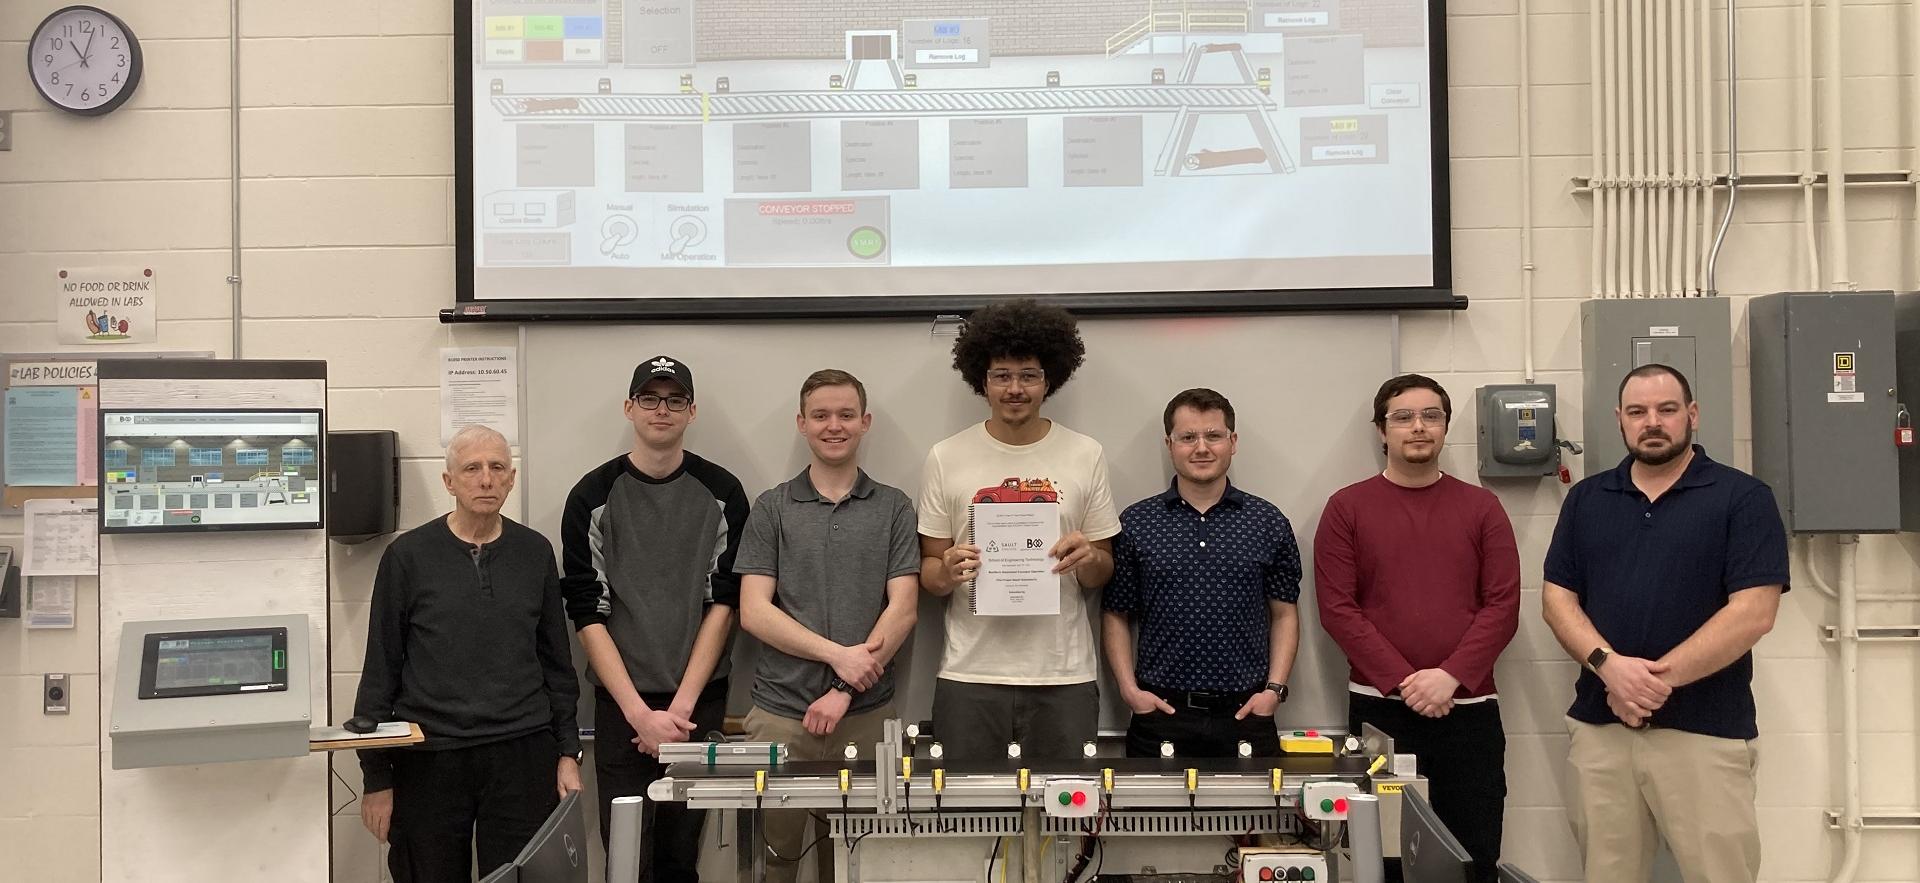 Engineering students and instructors posed with their demonstration